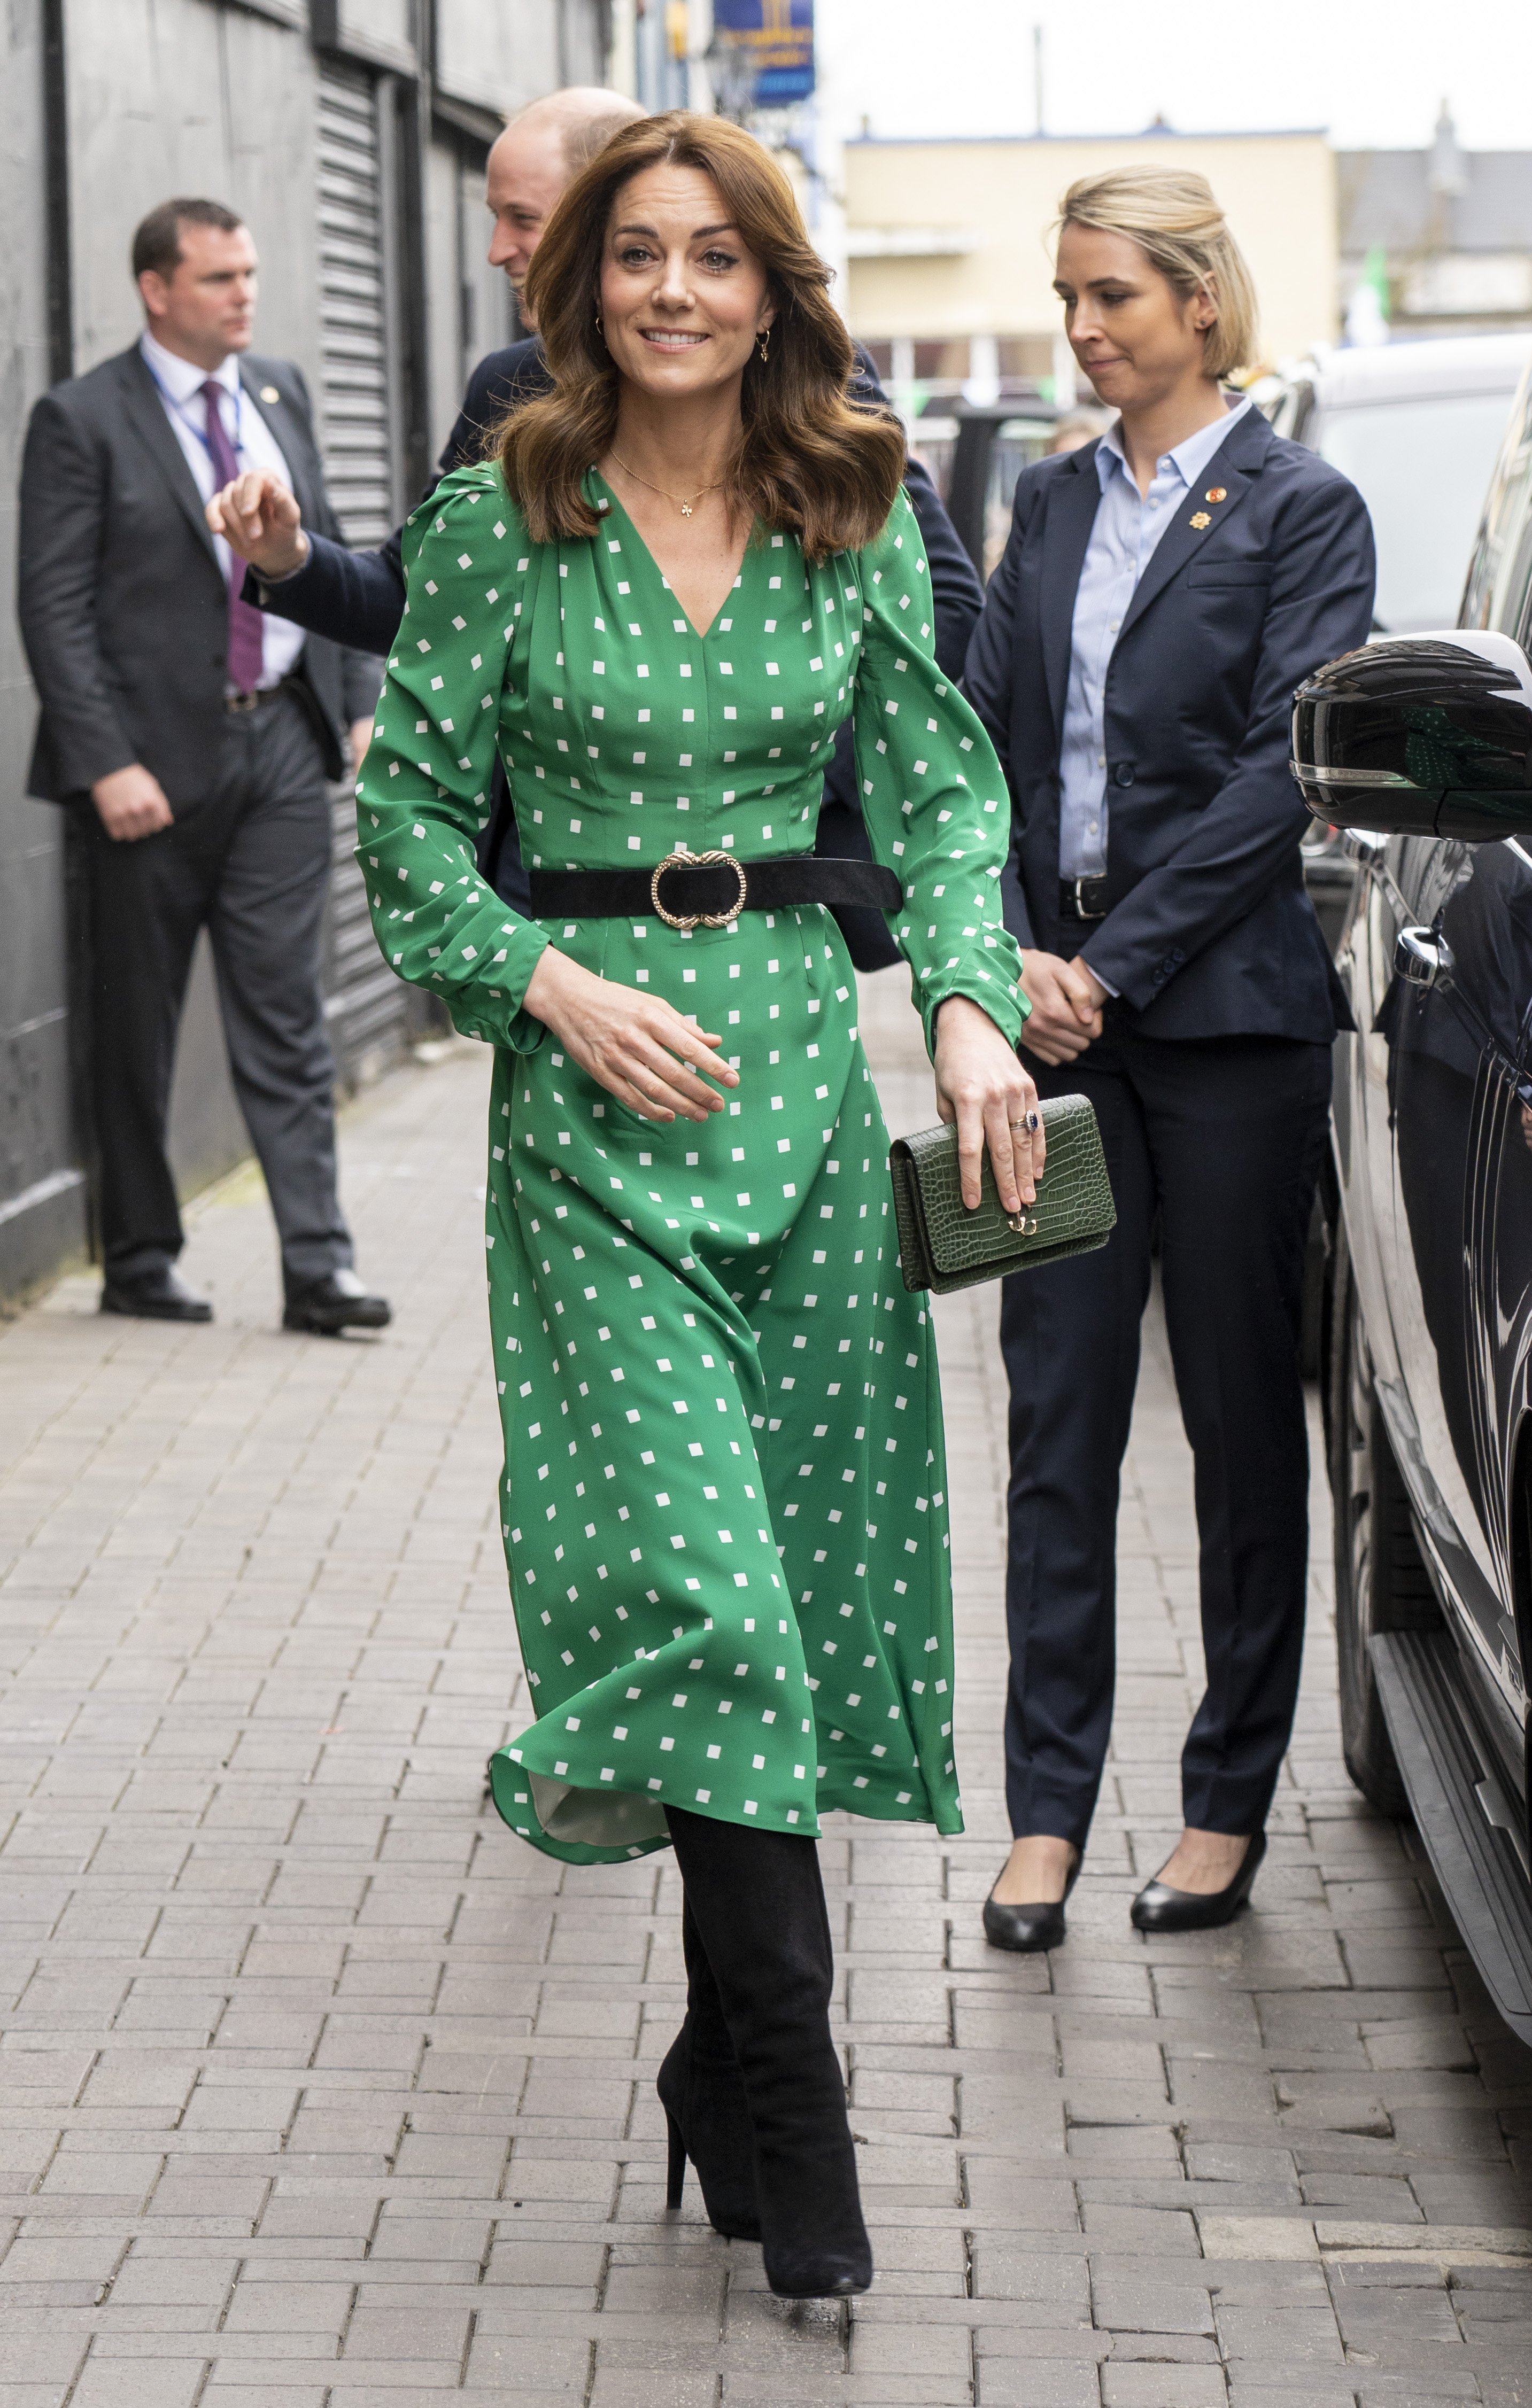 Prince William, Duke of Cambridge and Catherine, Duchess of Cambridge arrive to visit a family-owned, traditional Irish pub in Galway city centre during day three of their visit to Ireland on March 5, 2020 in Galway, Ireland. | Source: Getty Images